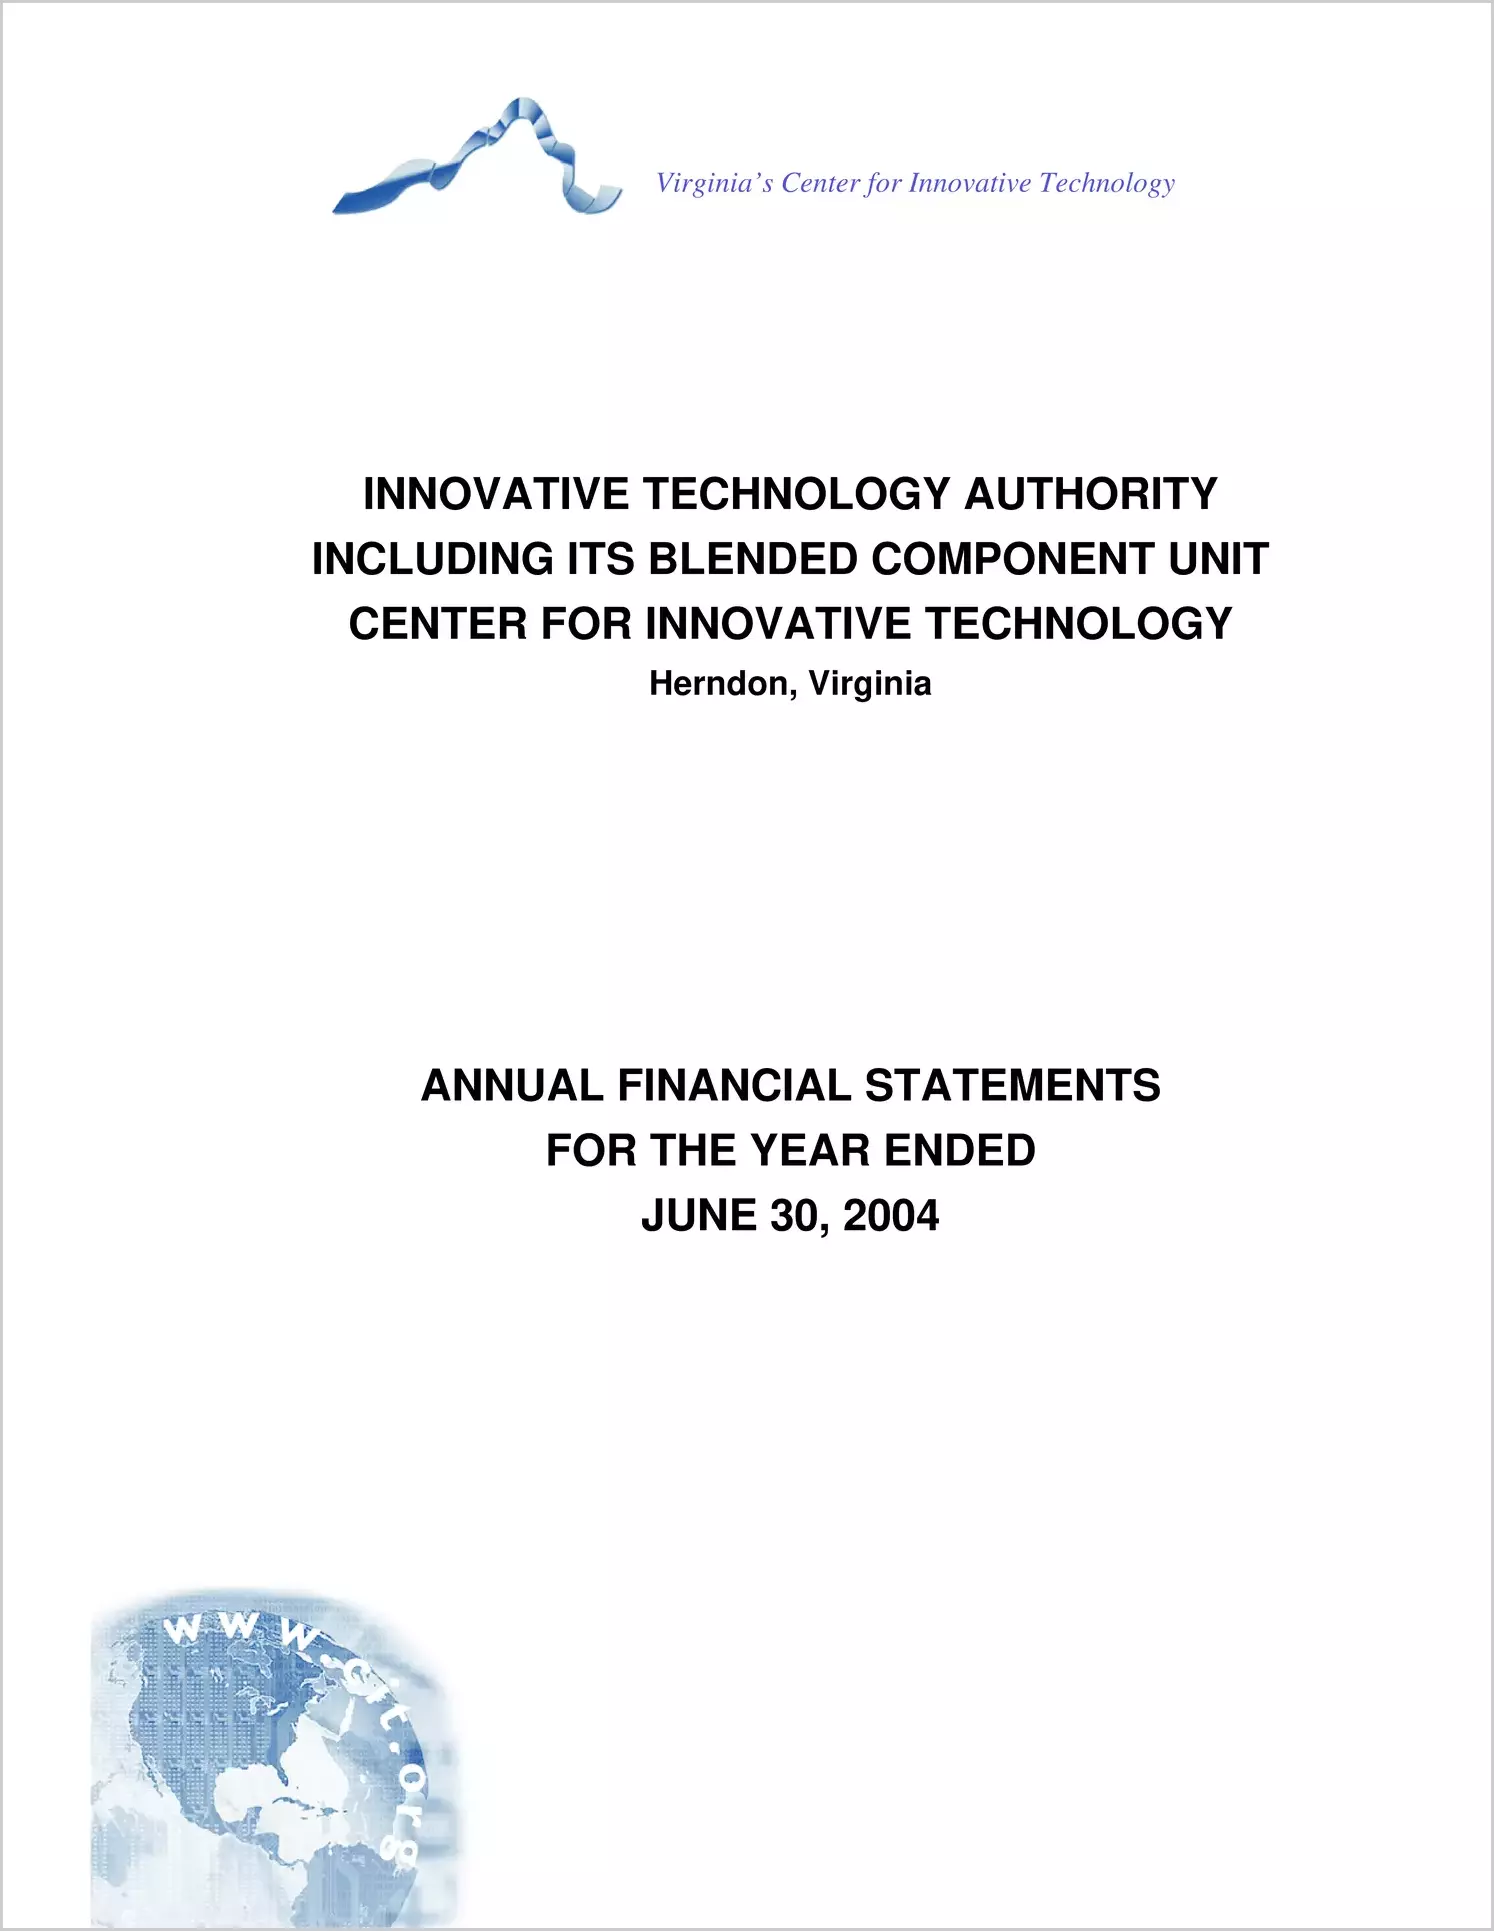 Innovative Technology Authority and the Center for Innovative Technology for the year ended June 30, 2004